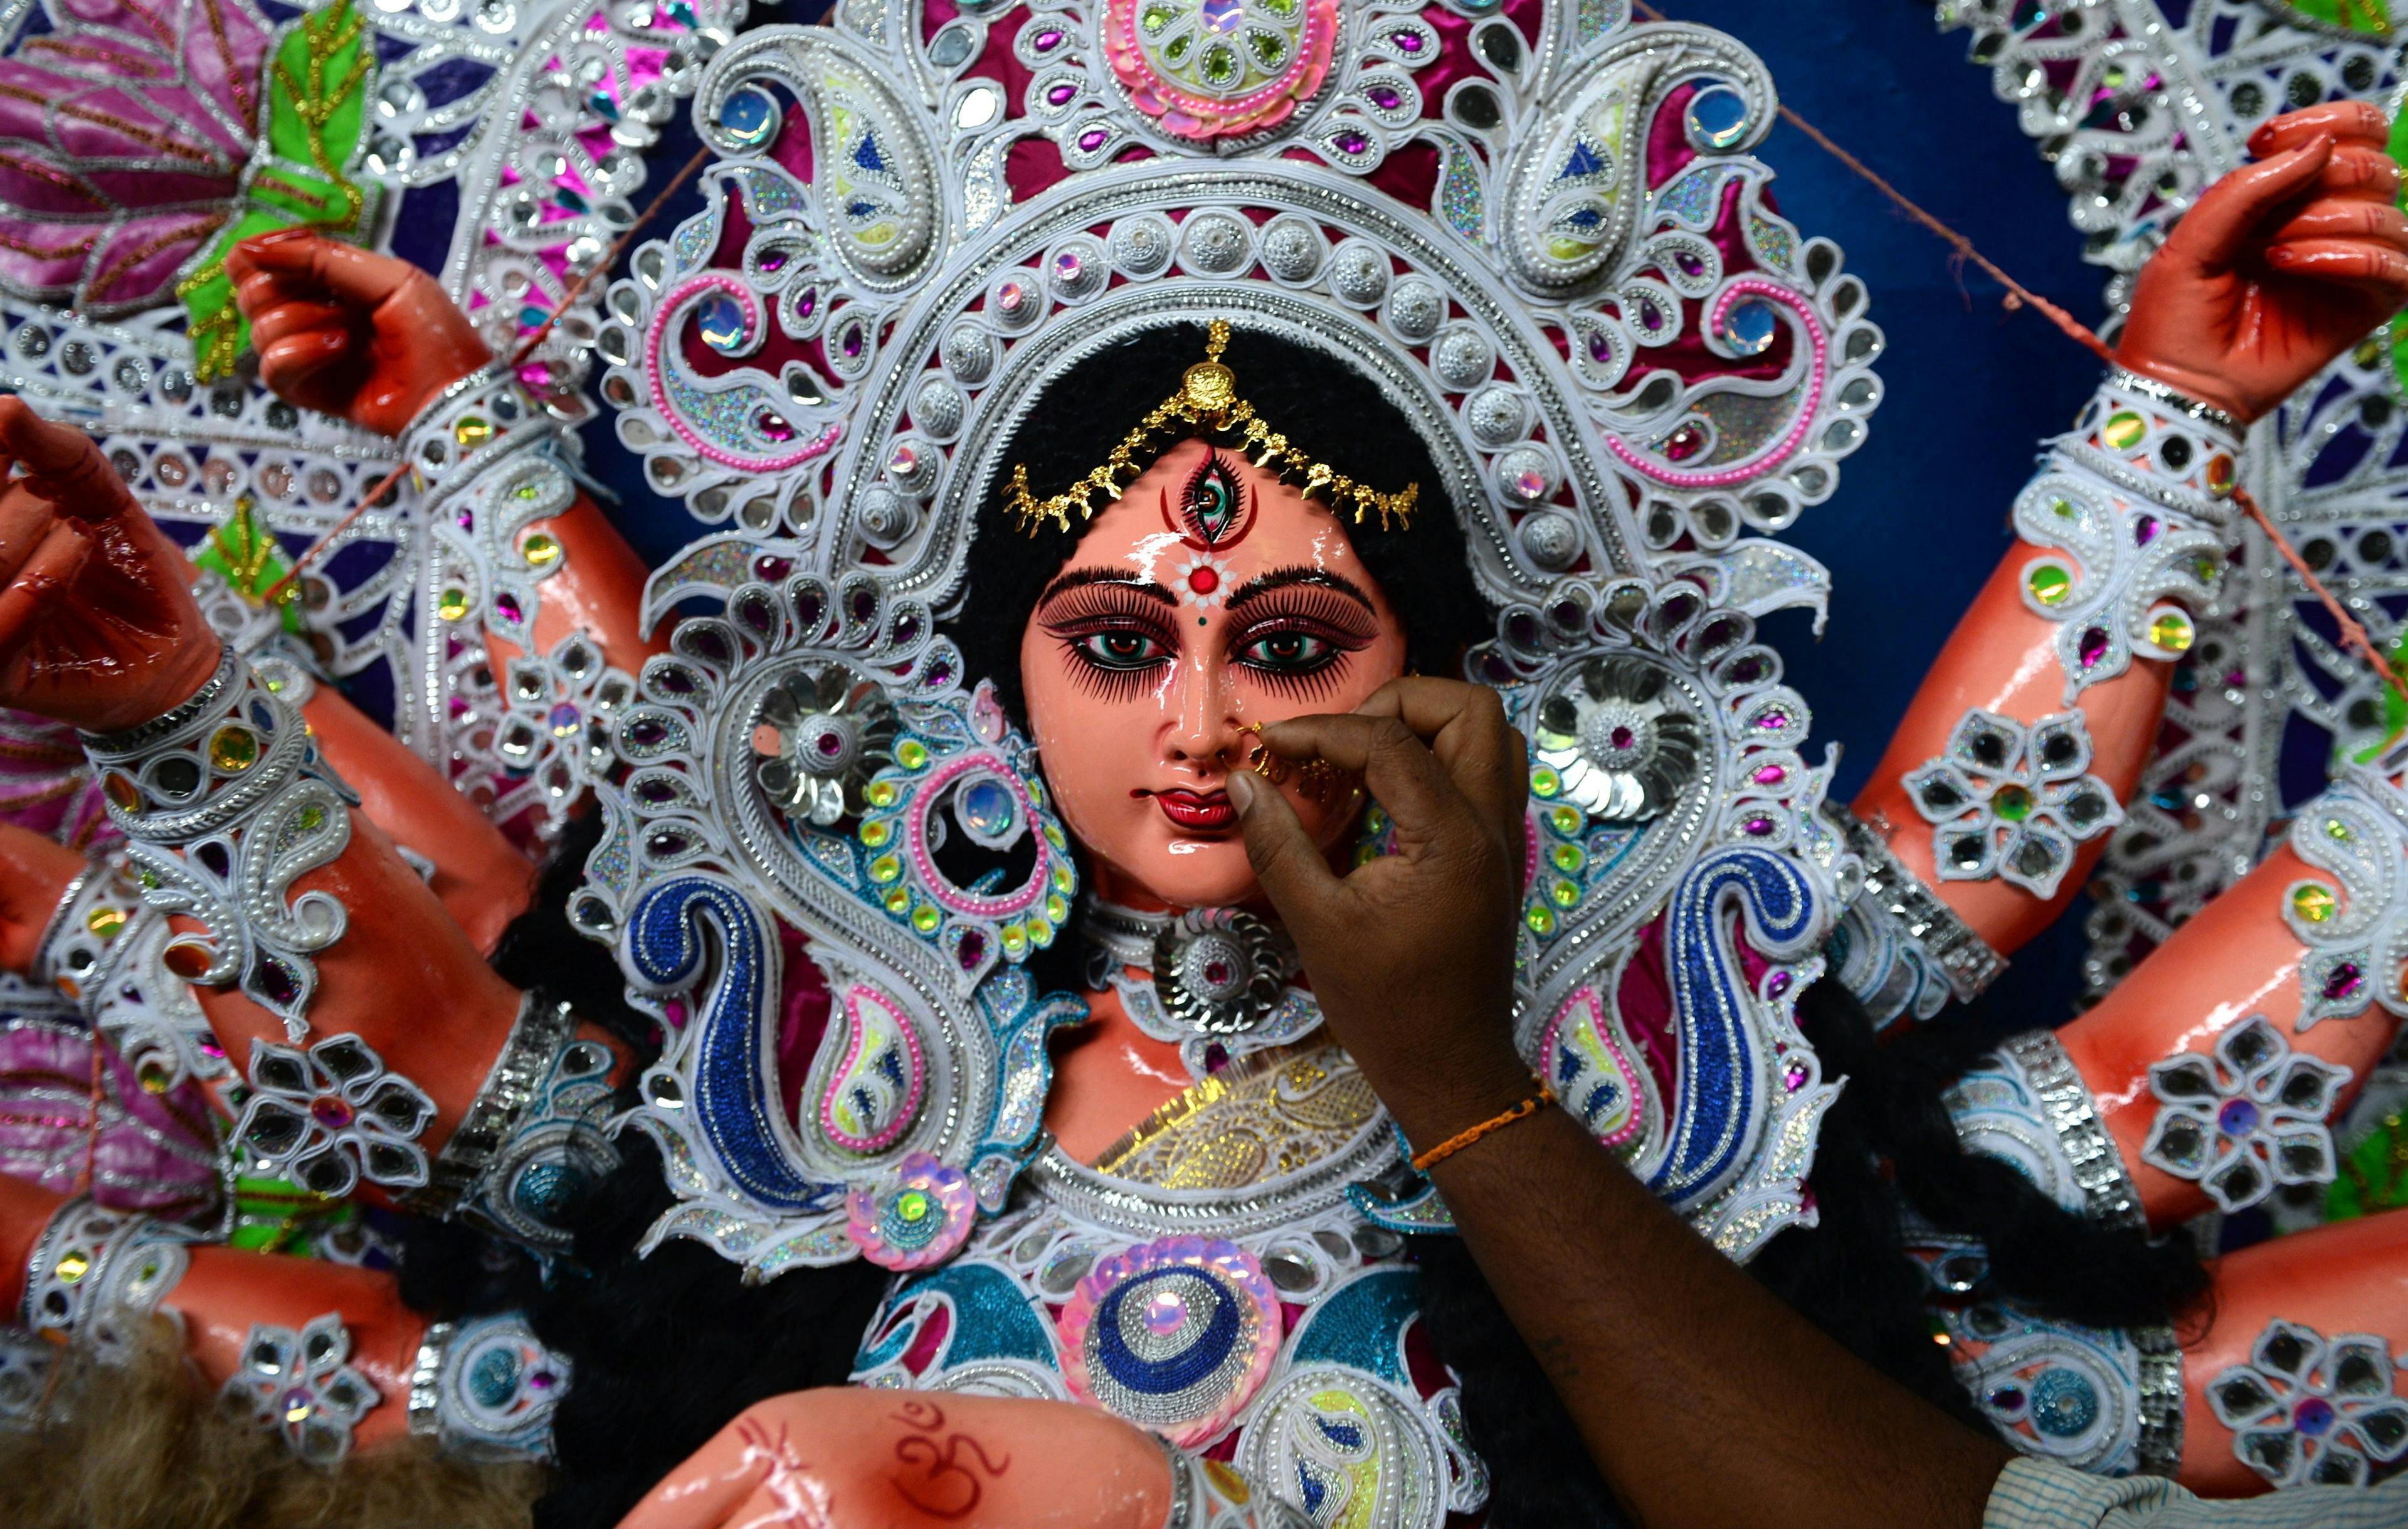 An Indian artisan puts a nose ring as he gives finishing touches on a clay idol of the Hindu Goddess Durga at his workshop in Chennai. (Photo credit should read ARUN SANKAR/AFP via Getty Images)